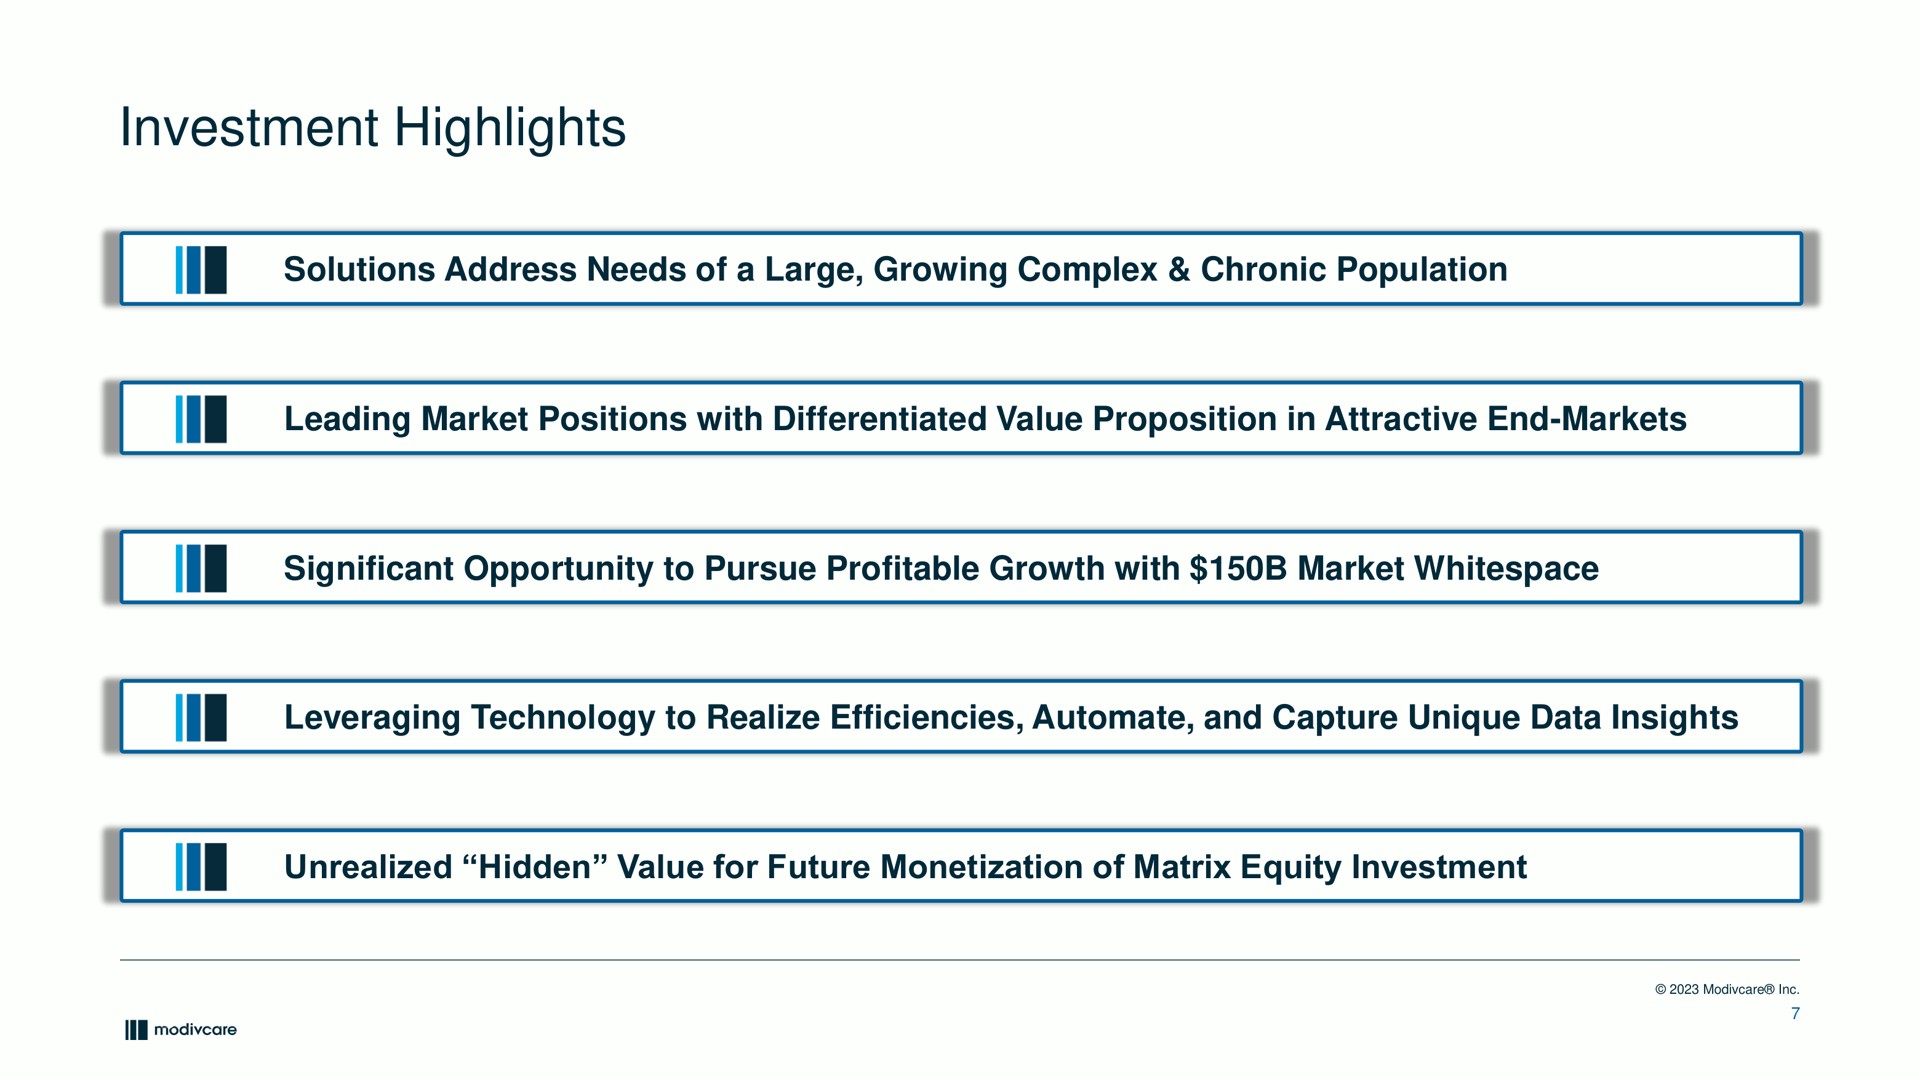 investment highlights solutions address needs of a large growing complex chronic population leading market positions with differentiated value proposition in attractive end markets significant opportunity to pursue profitable growth with market leveraging technology to realize efficiencies and capture unique data insights unrealized hidden value for future monetization of matrix equity investment | ModivCare